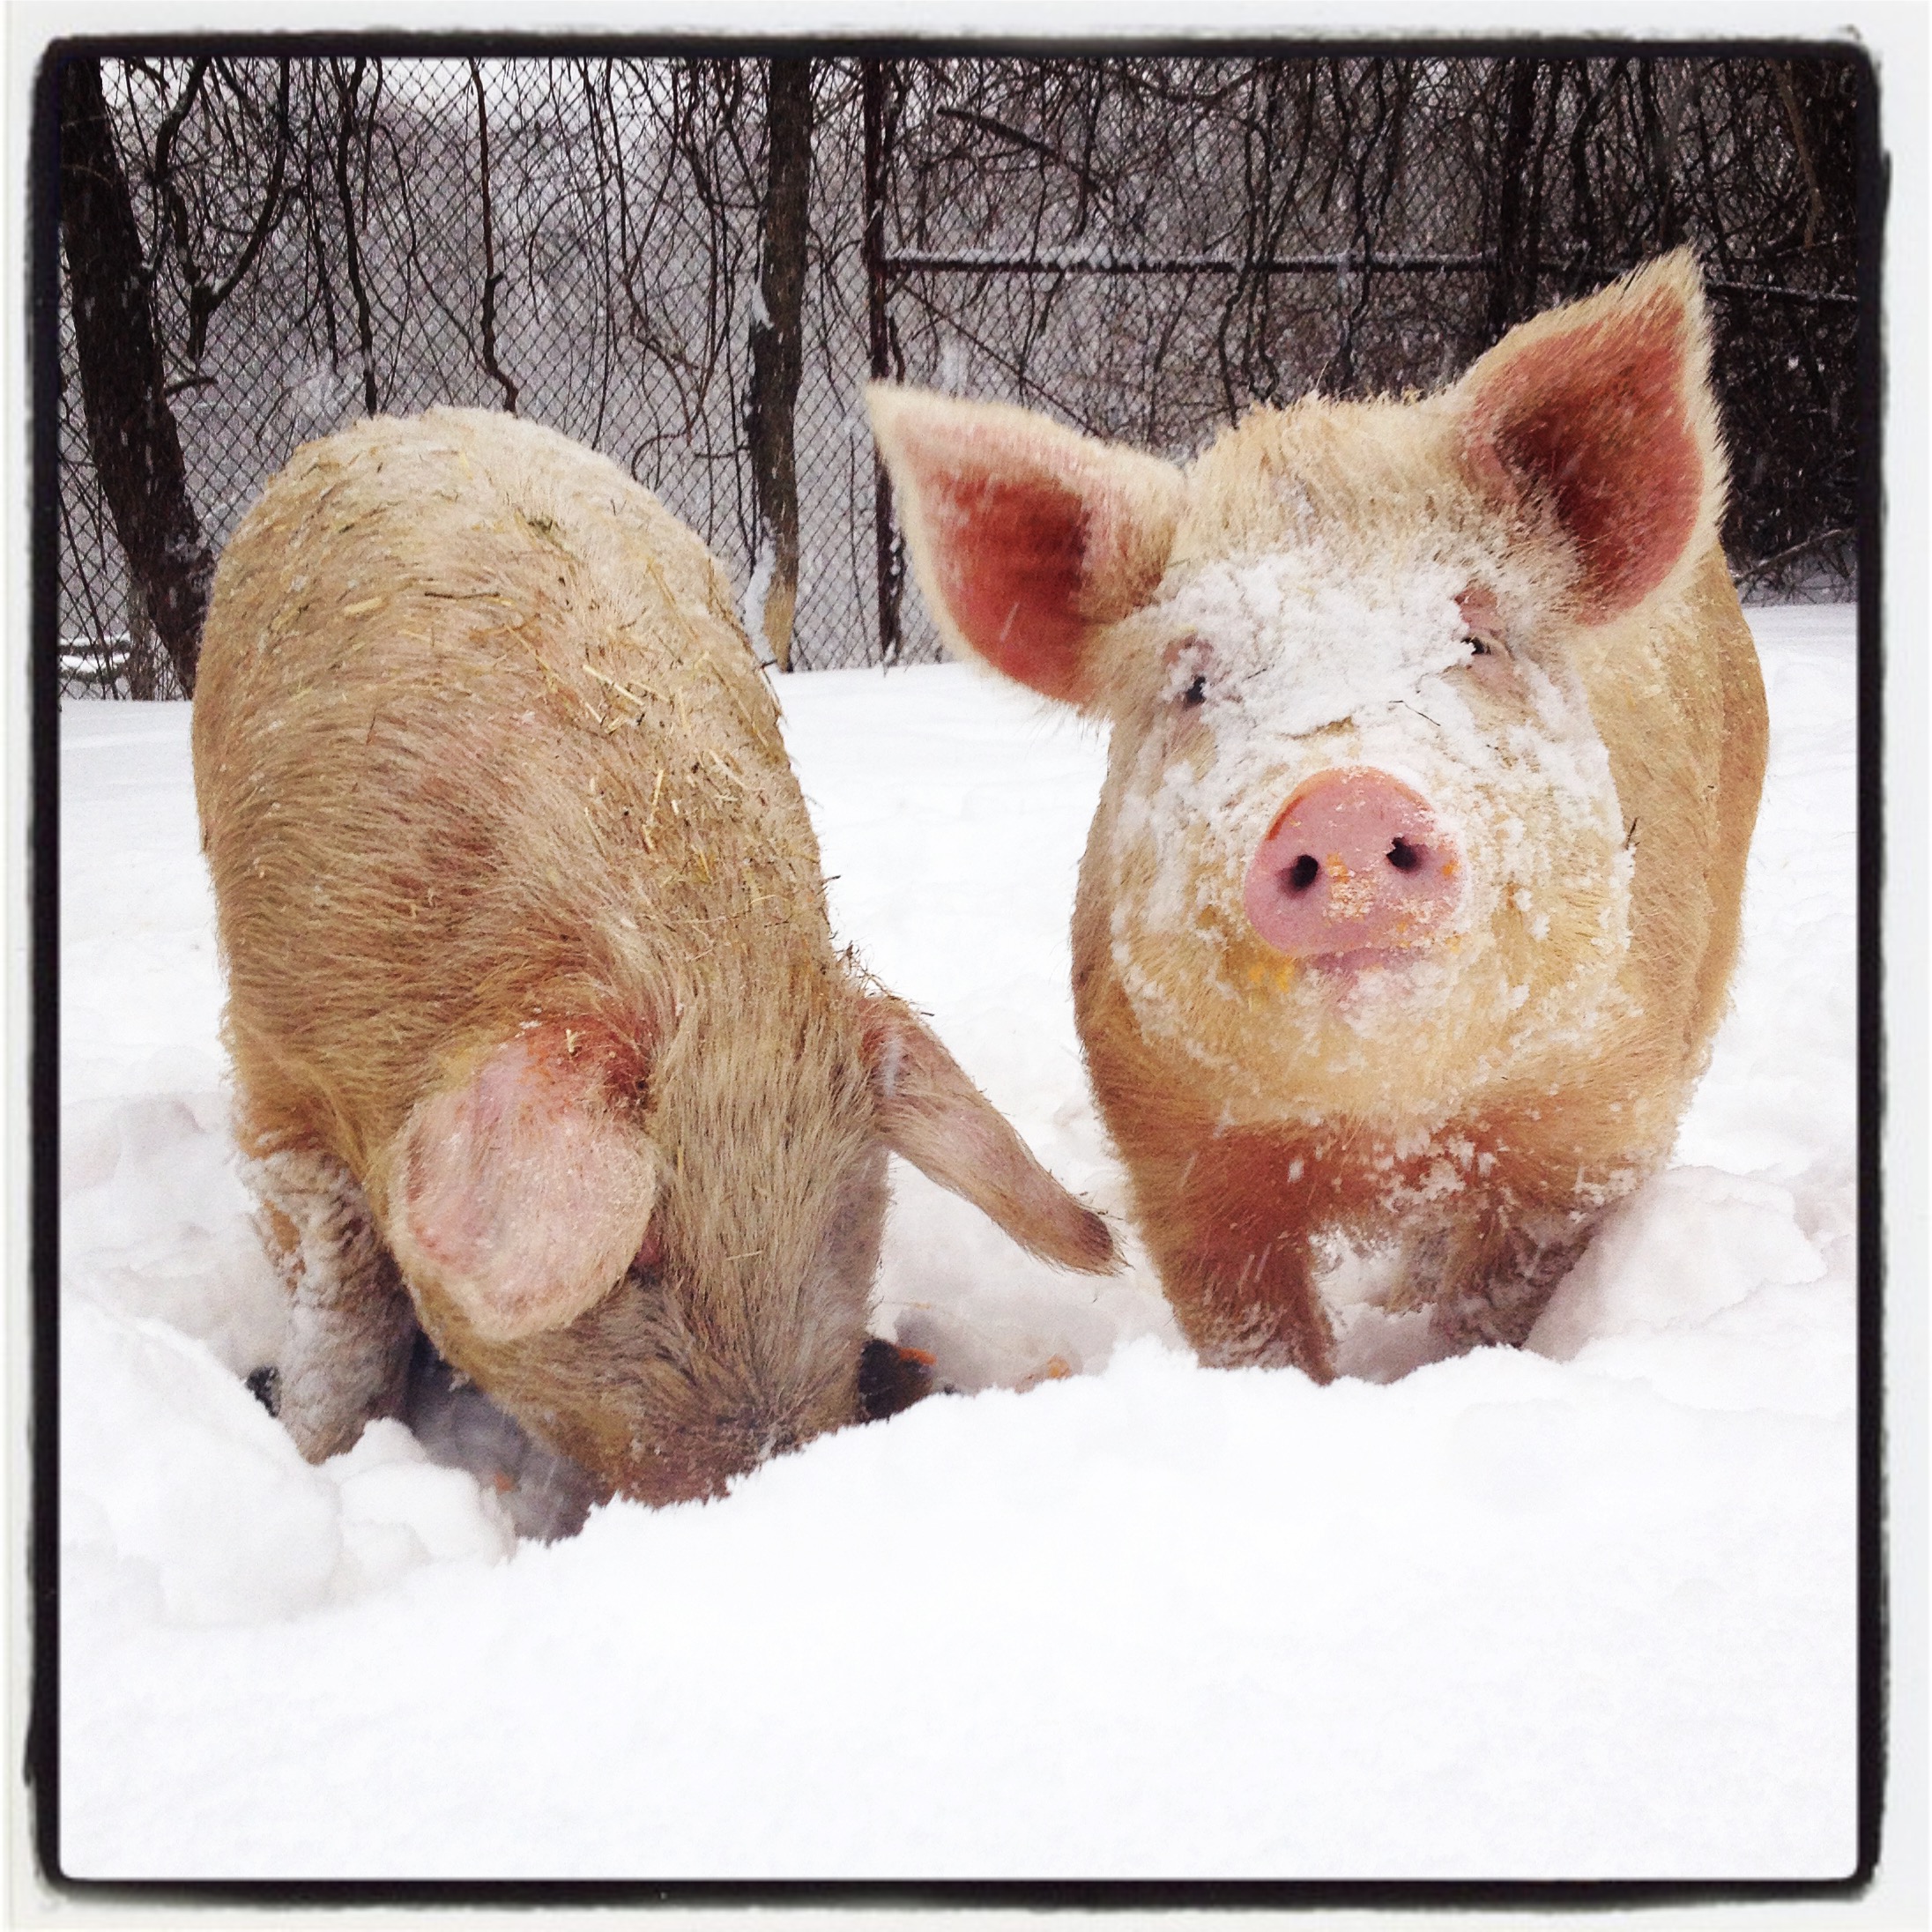  pigs in snow 